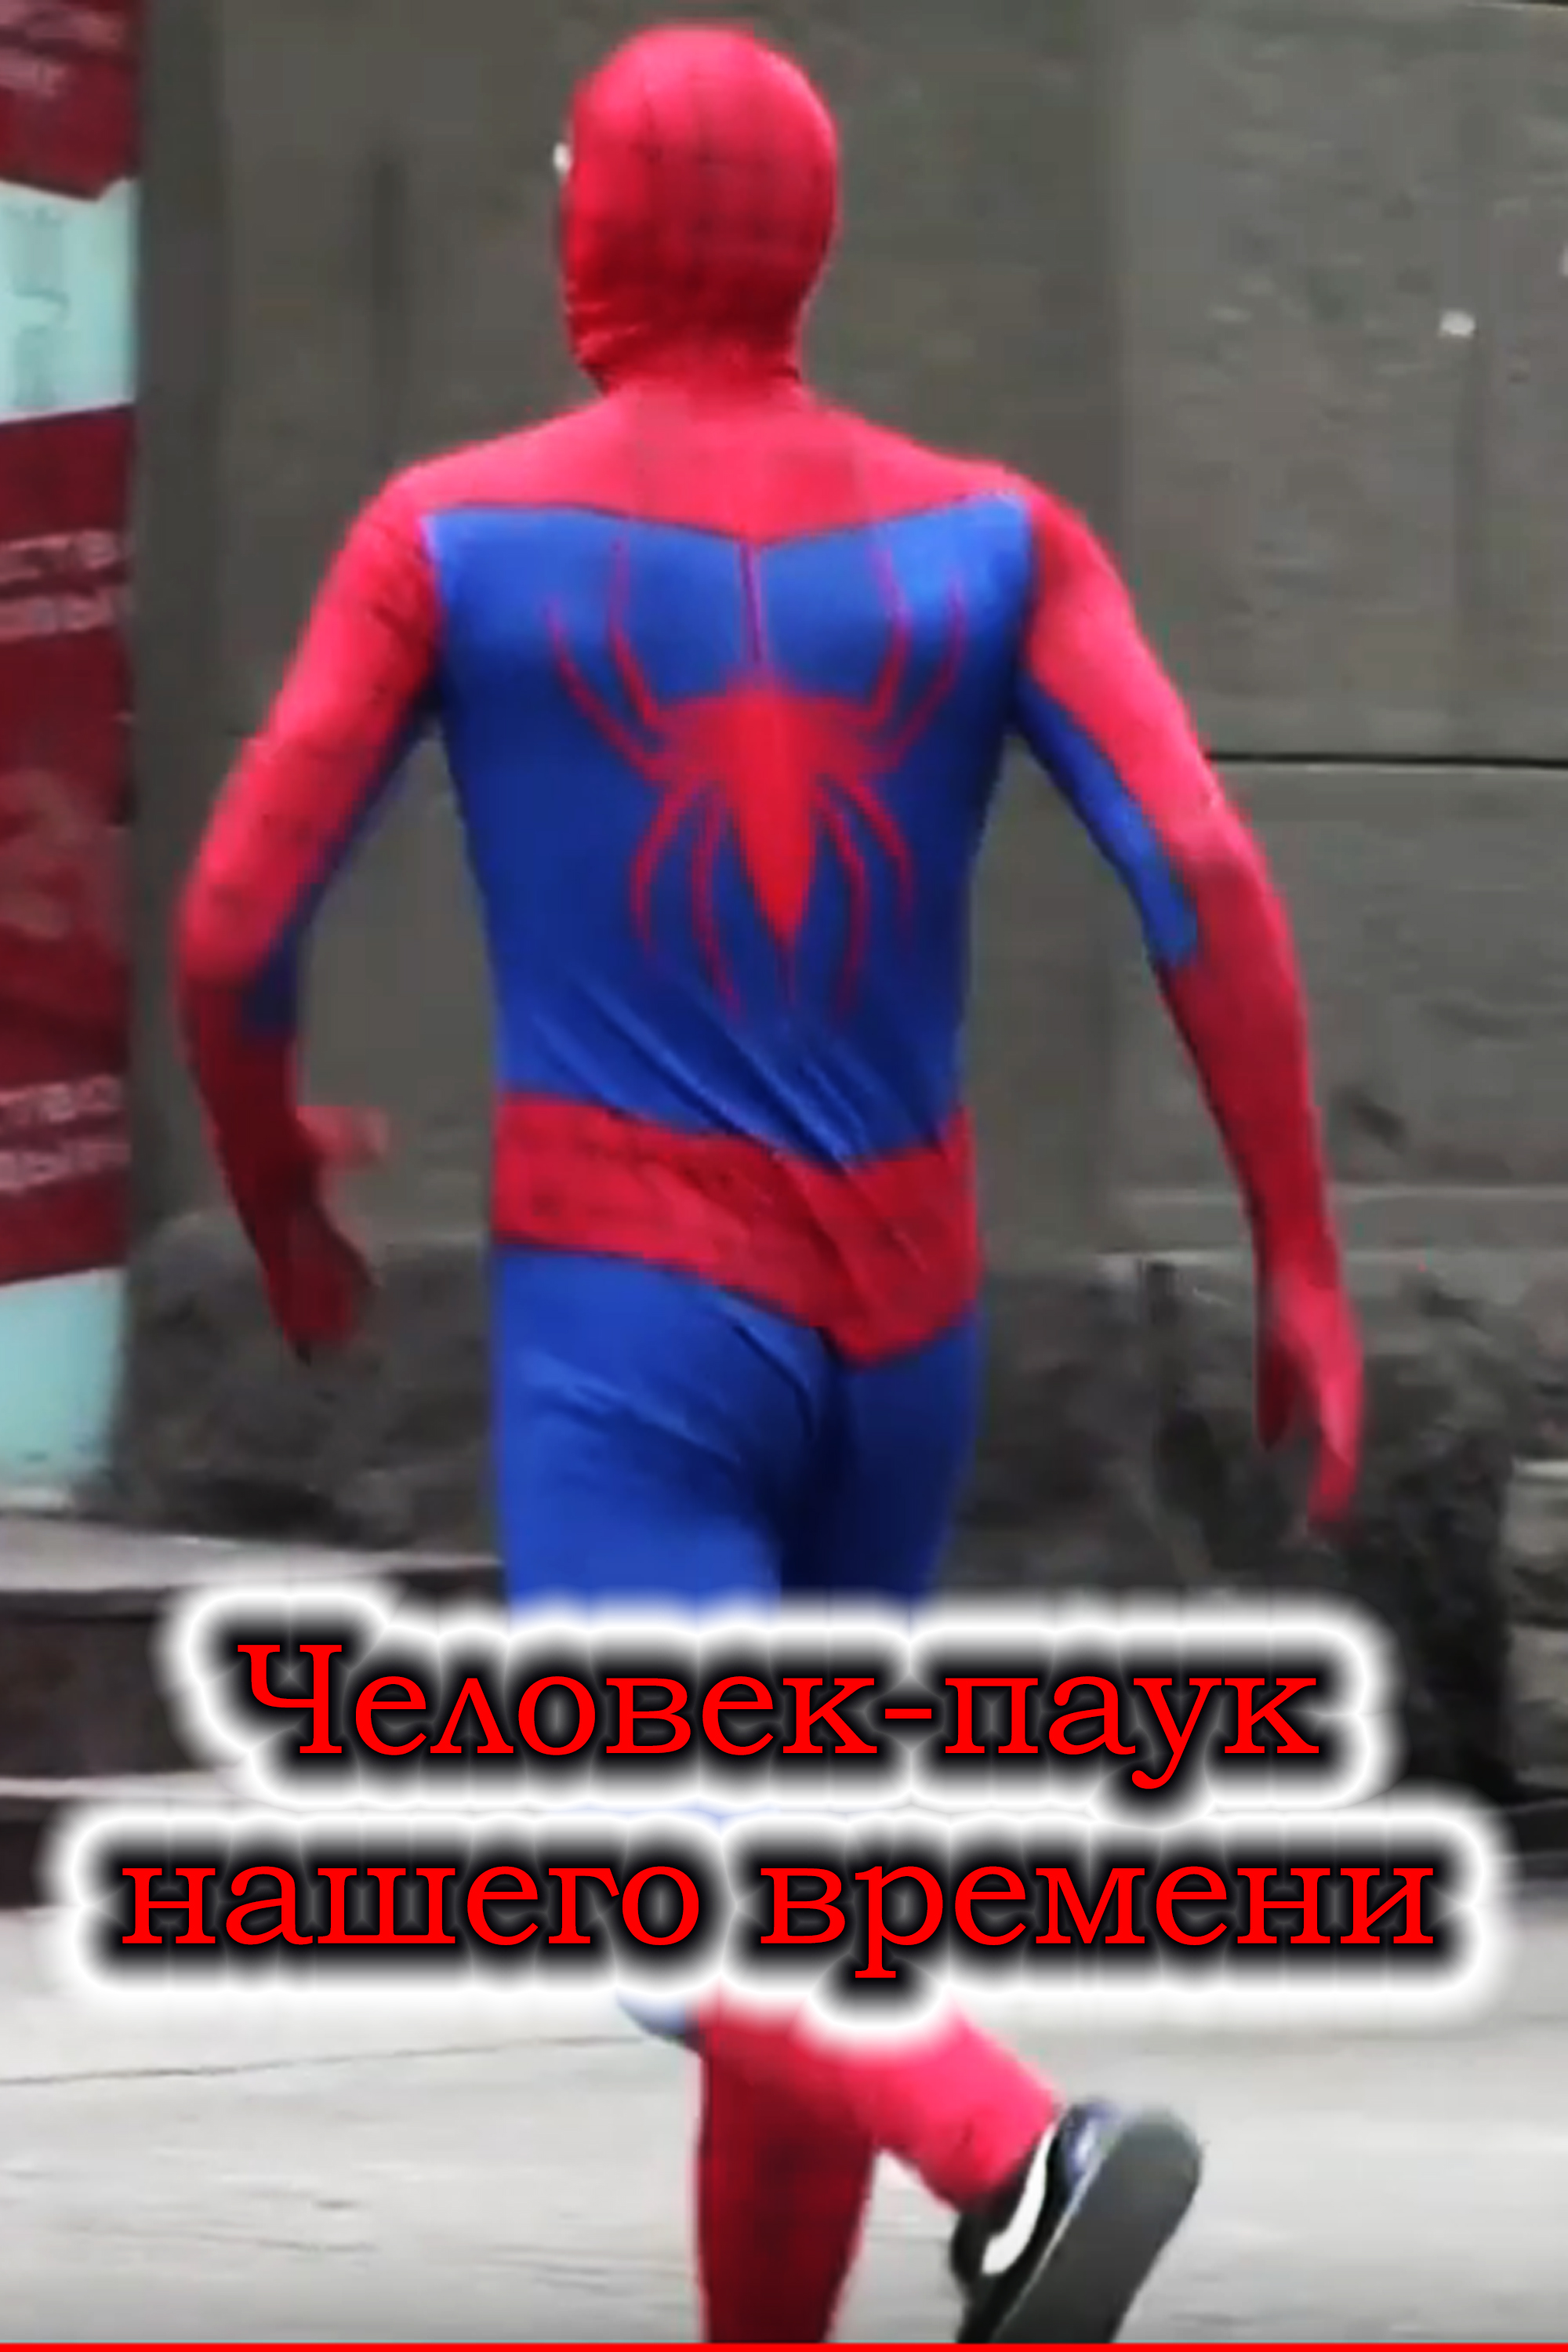 Spider-man of our time